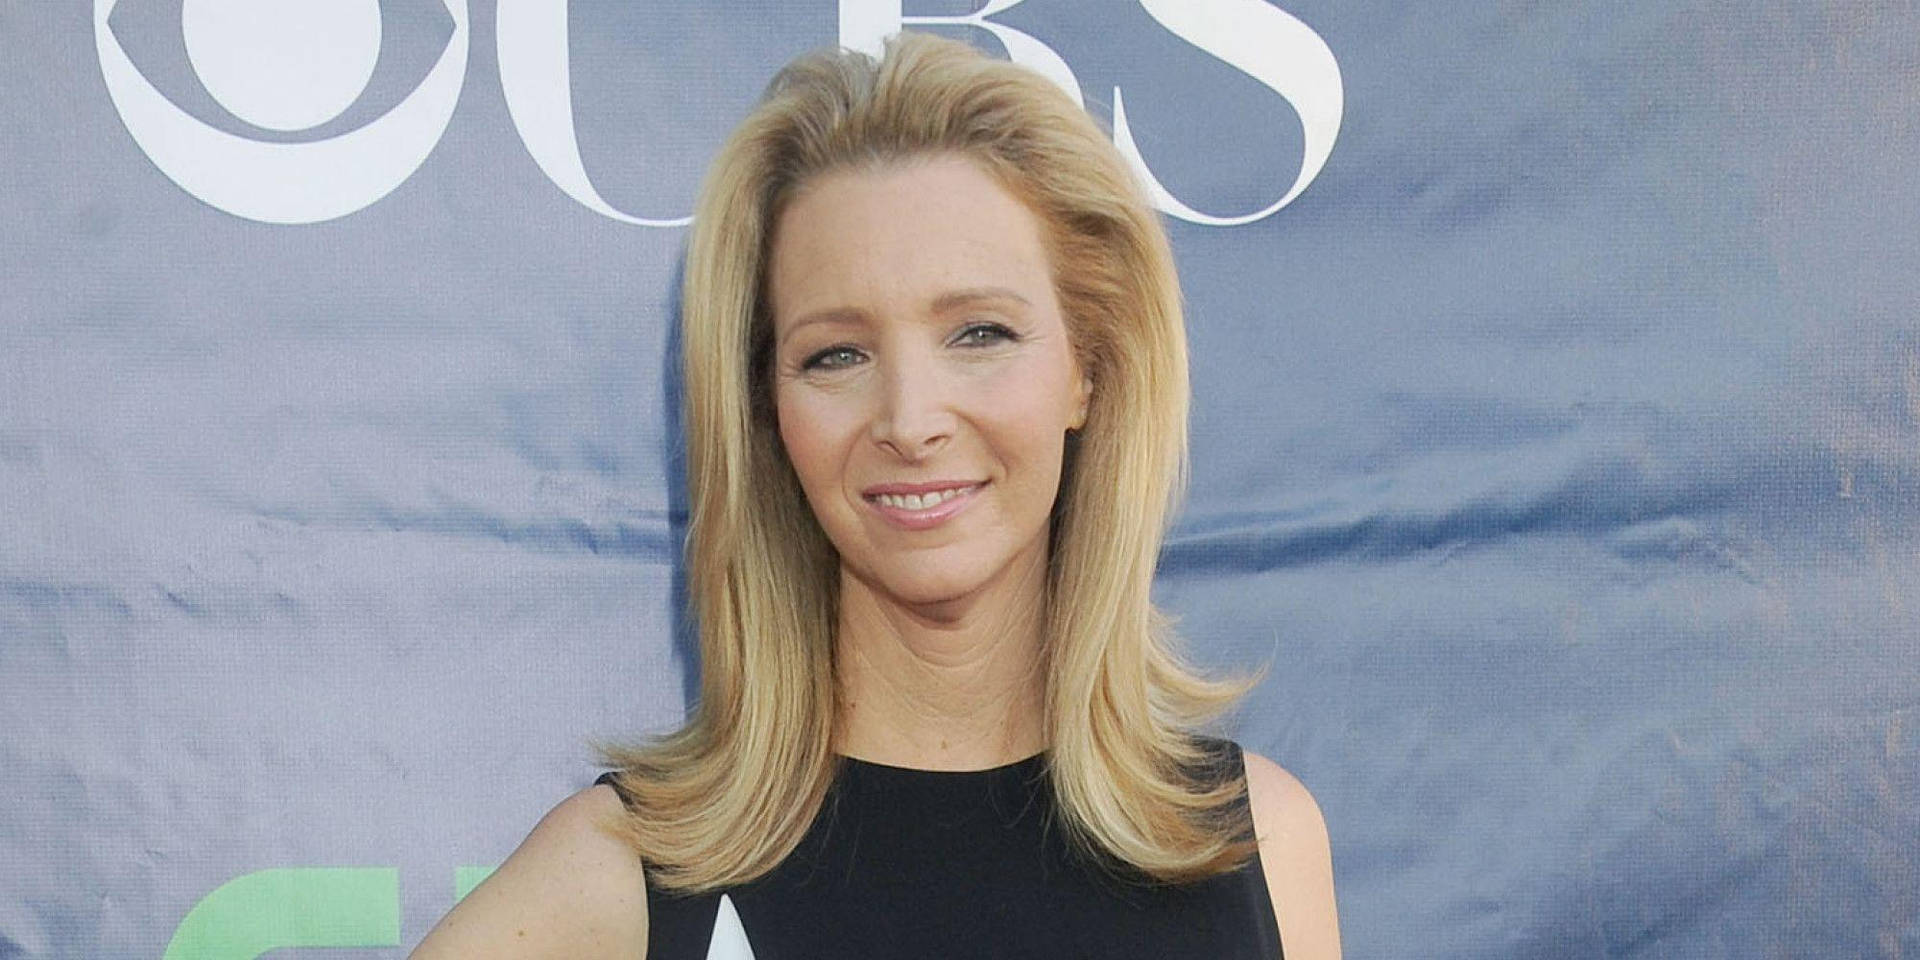 Lisakudrow, Stylisches Schwarzes Outfit. Wallpaper